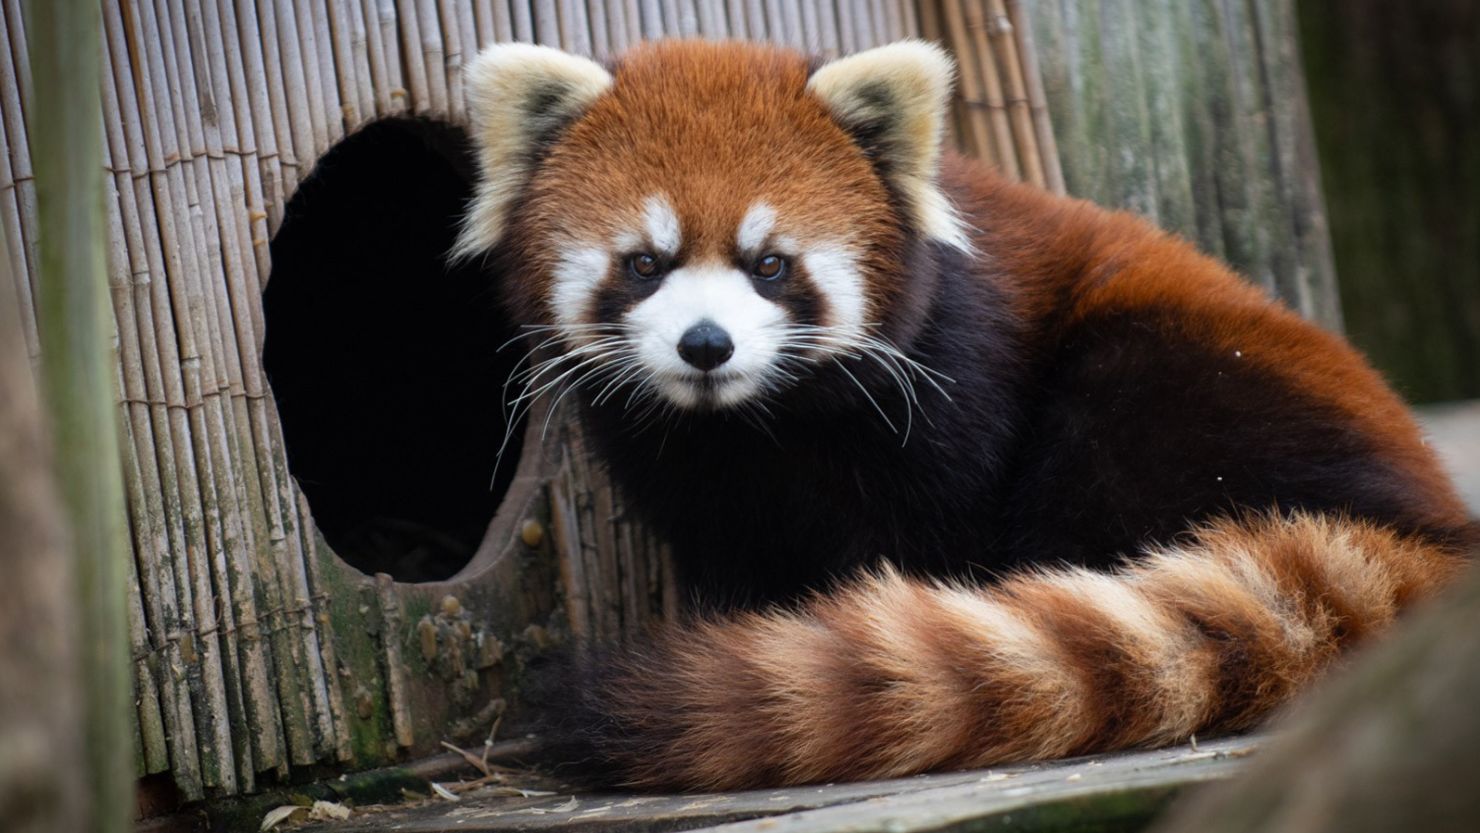 A young red panda that went missing at the Columbus Zoo and Aquarium has been found, the zoo said.